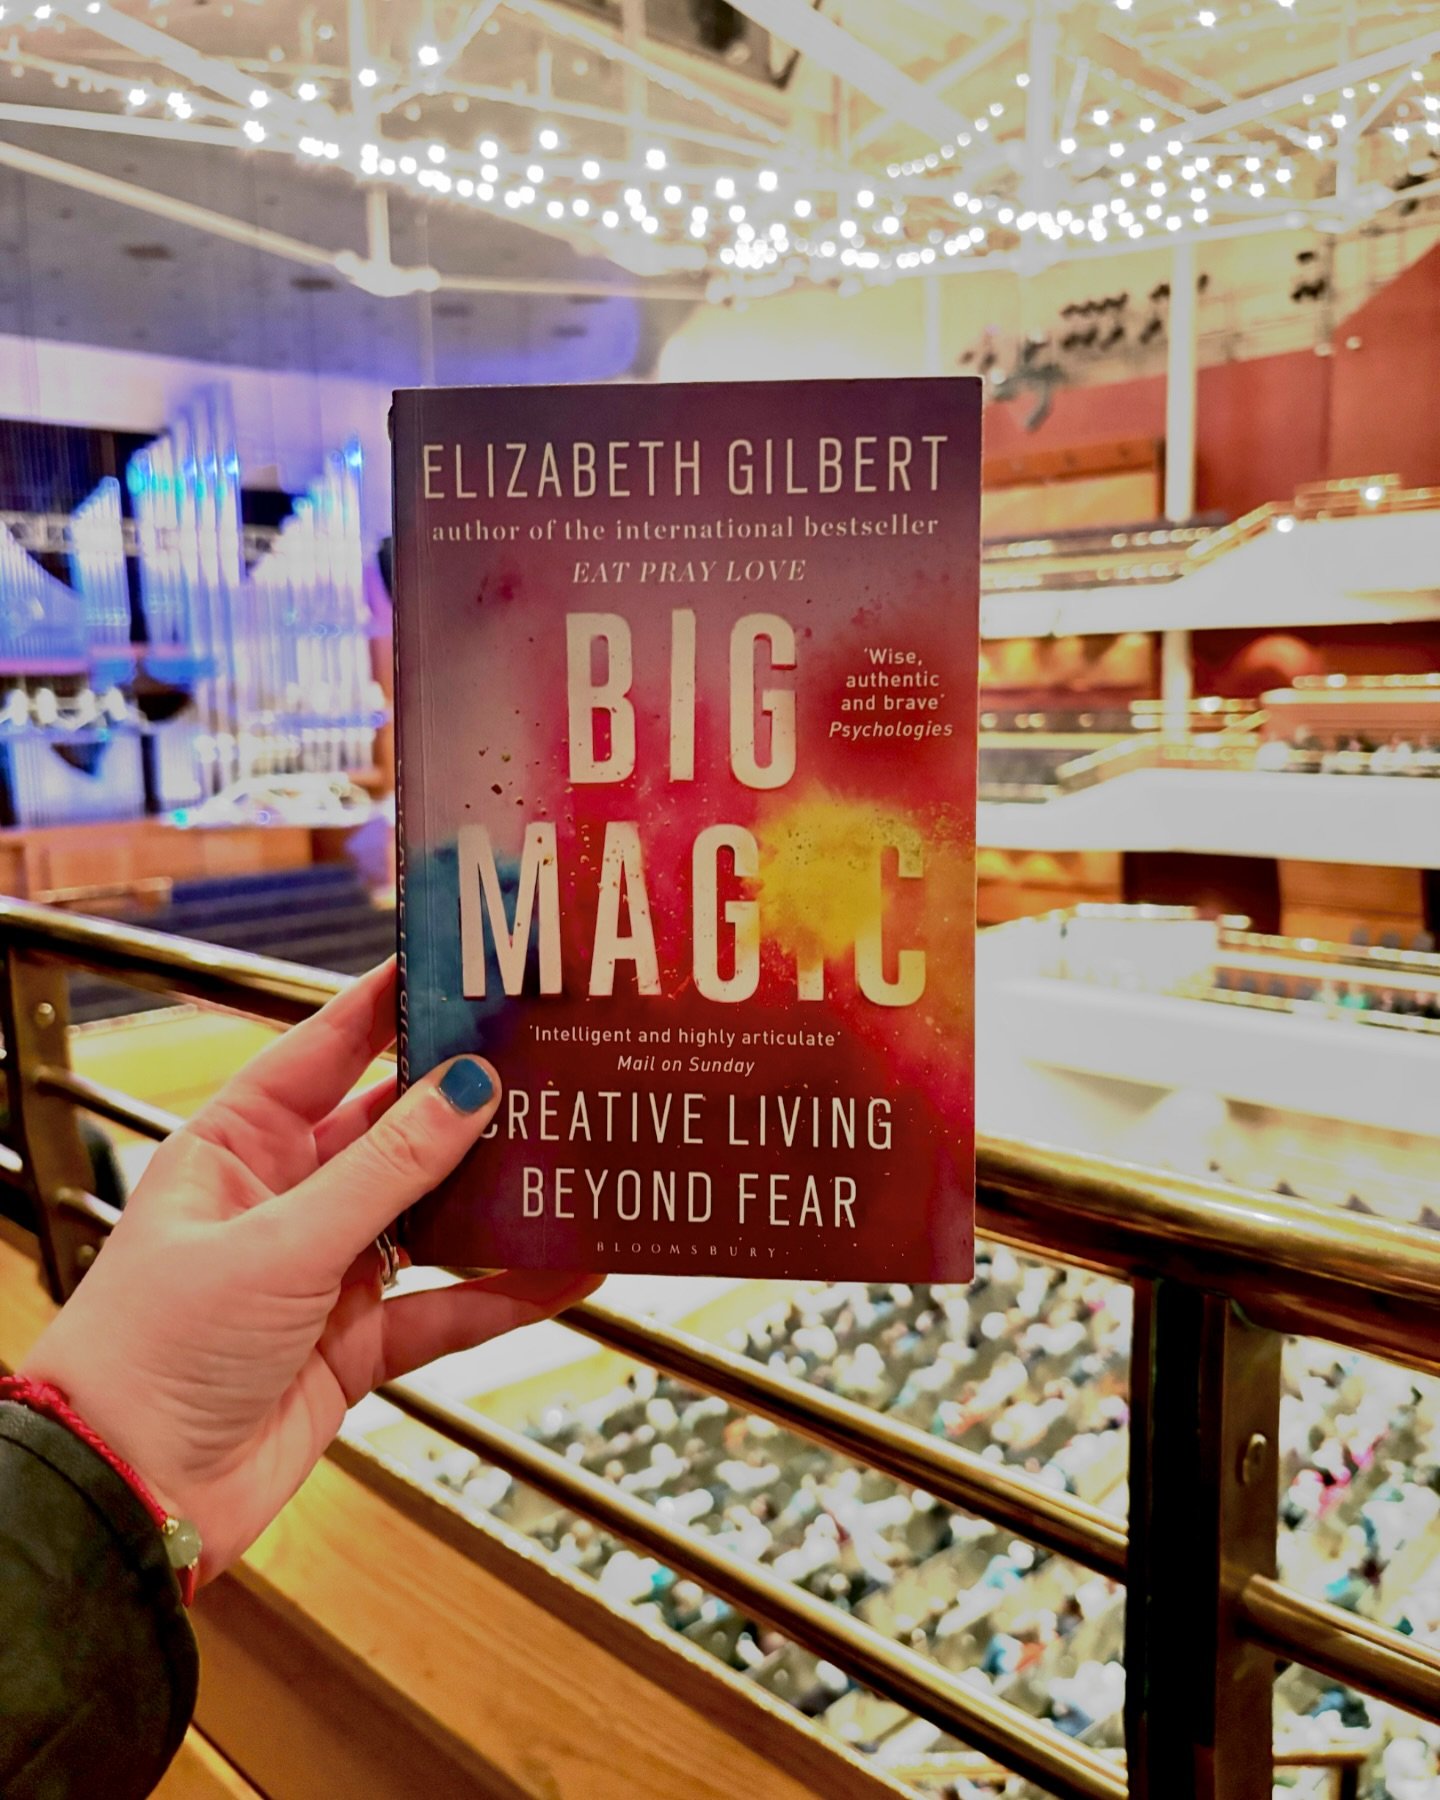 💖I had the amazing opportunity to listen to a talk by the wonderful @elizabeth_gilbert_writer last night at the Bridgewater Hall in Manchester and there was so many little gems of wise words that I took from it&hellip;

✨The pursuit of purpose - how